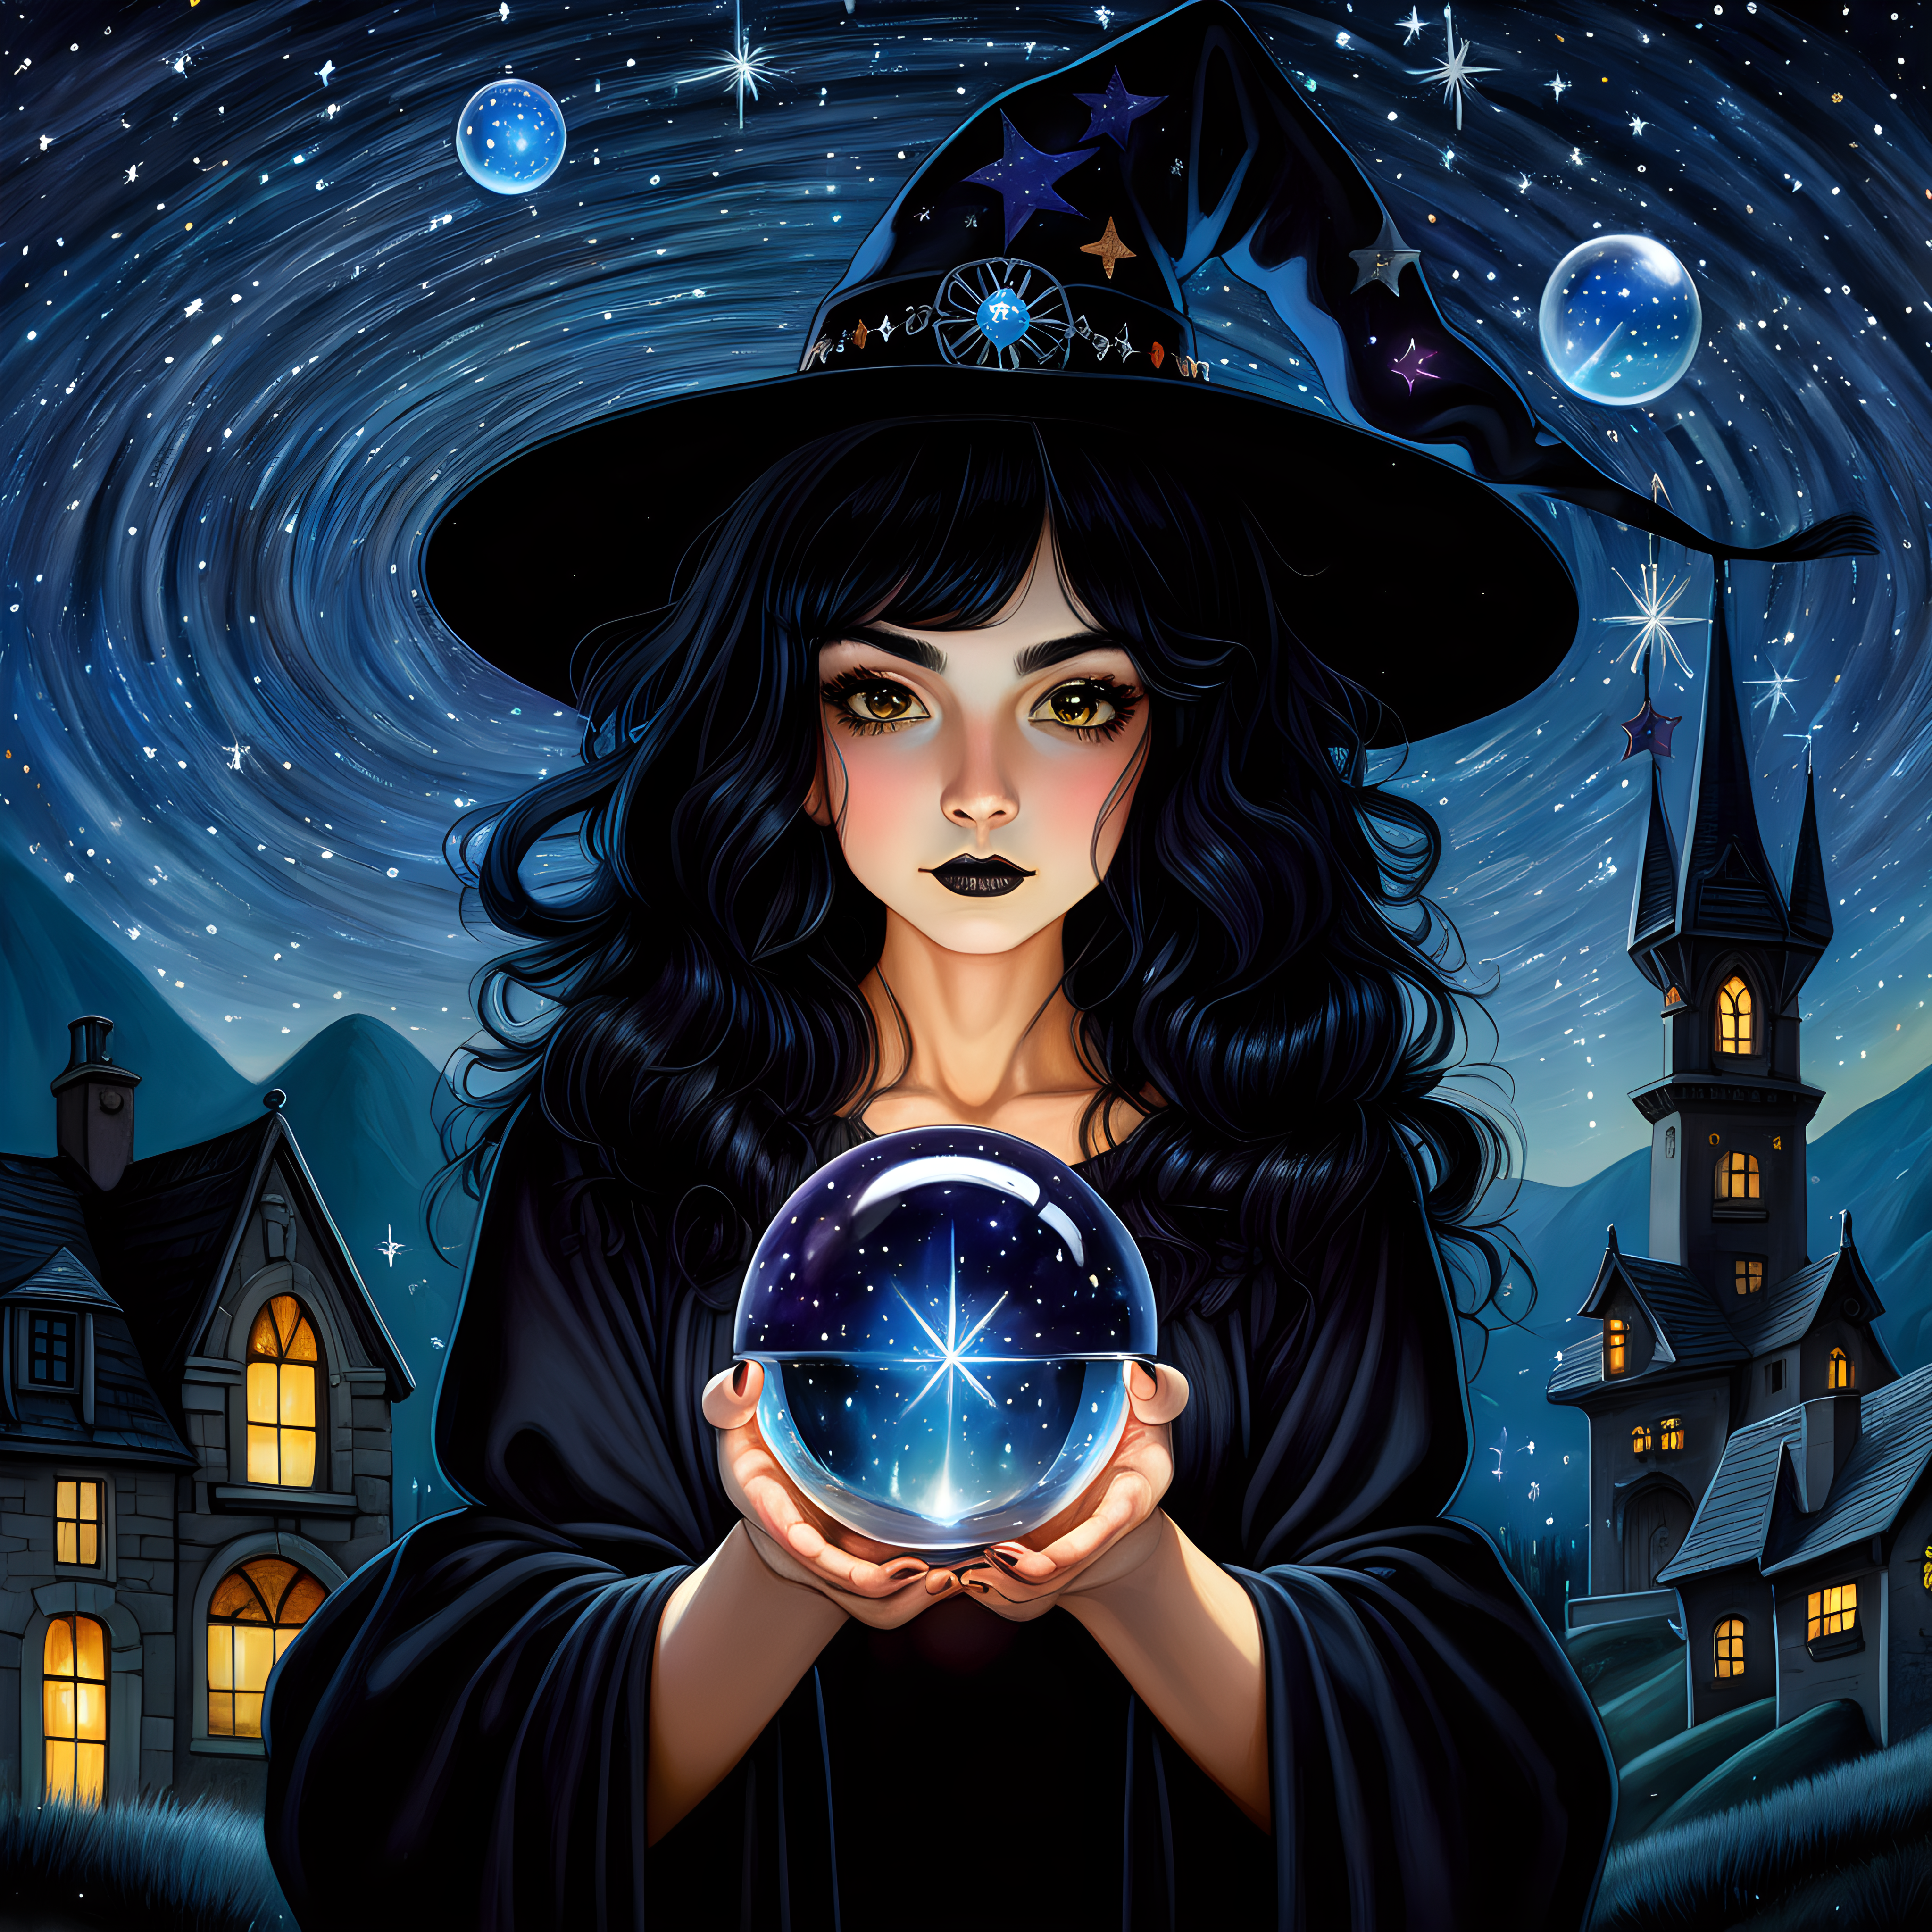 Black hair witch on starry night background holing a crystal ball